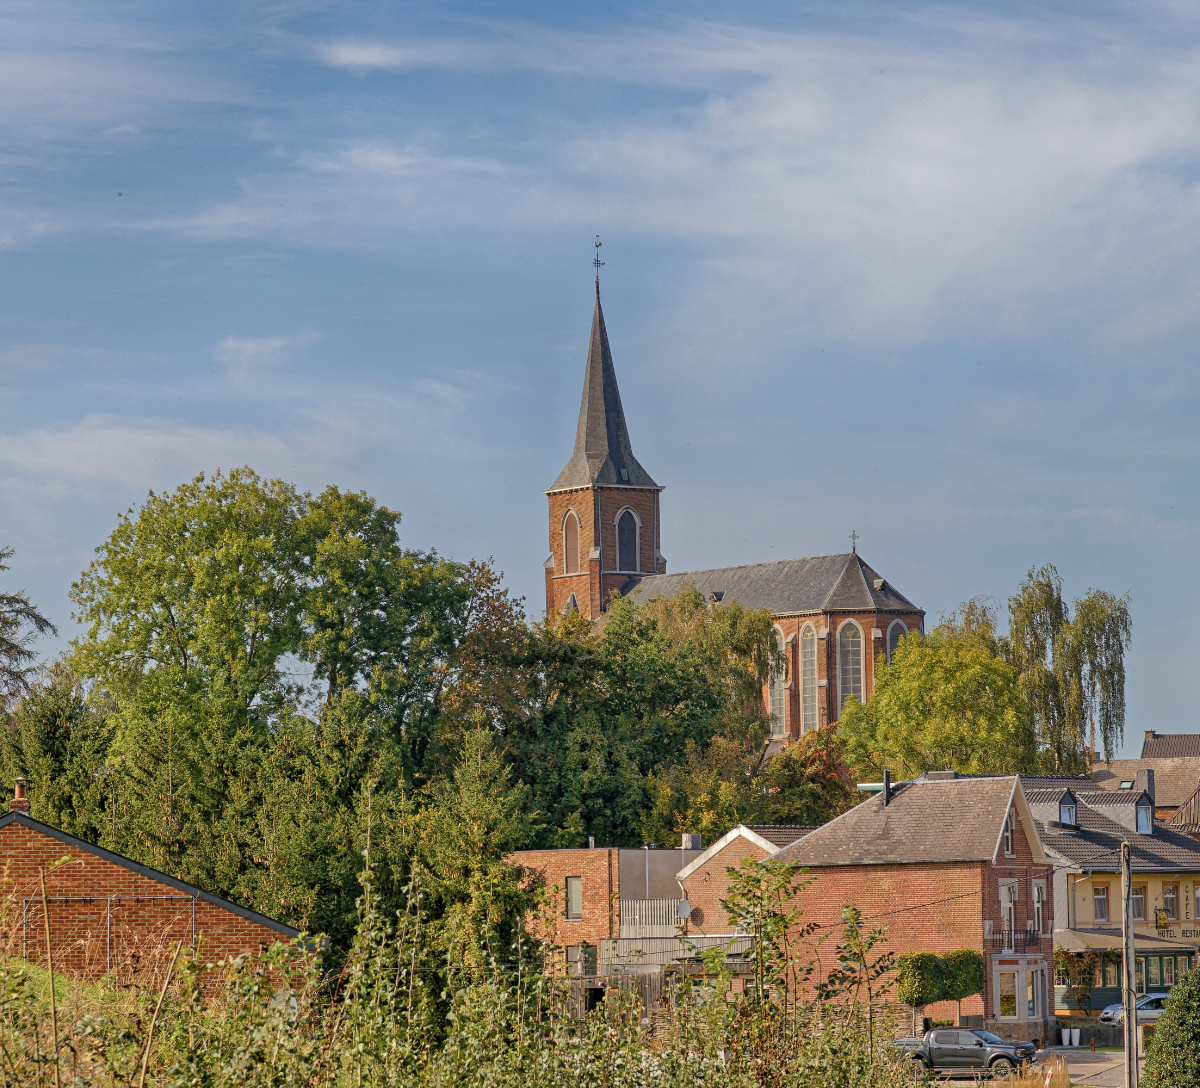 Small photo of Teuven in the Voer region of Belgium